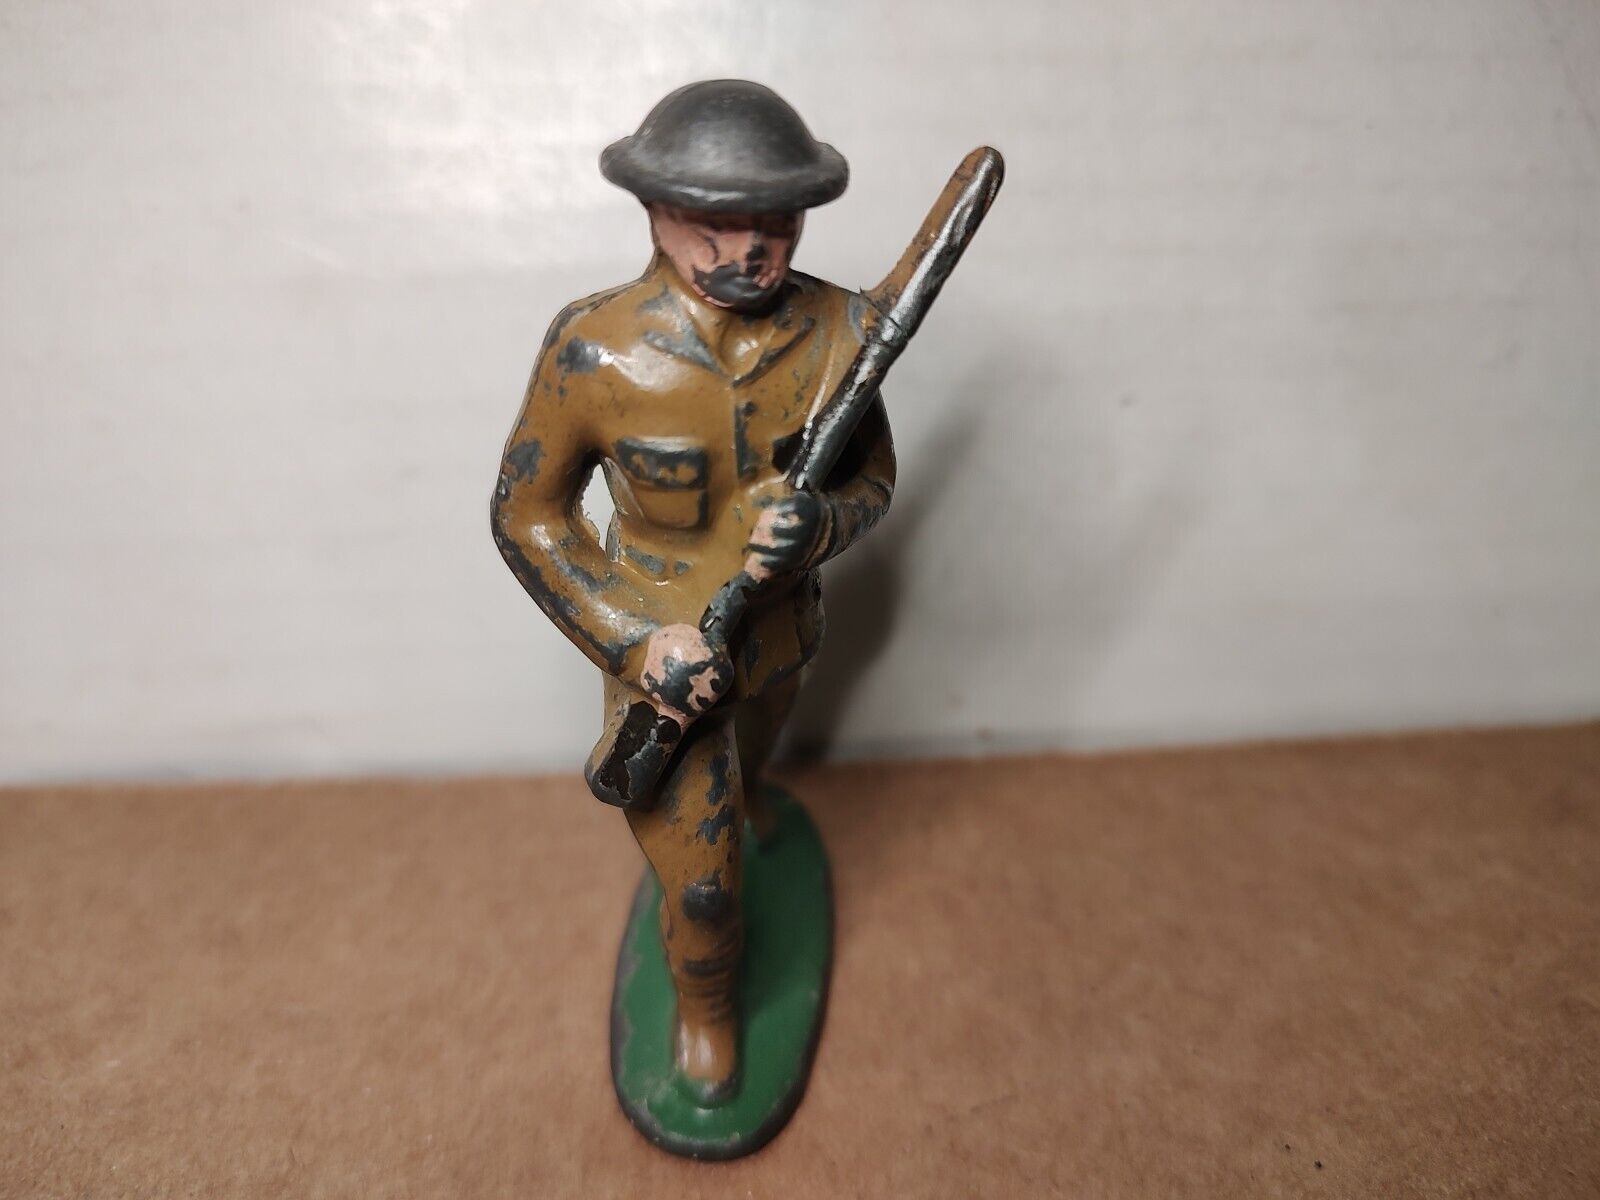 Tommy Toy Port Arms Toy Soldier